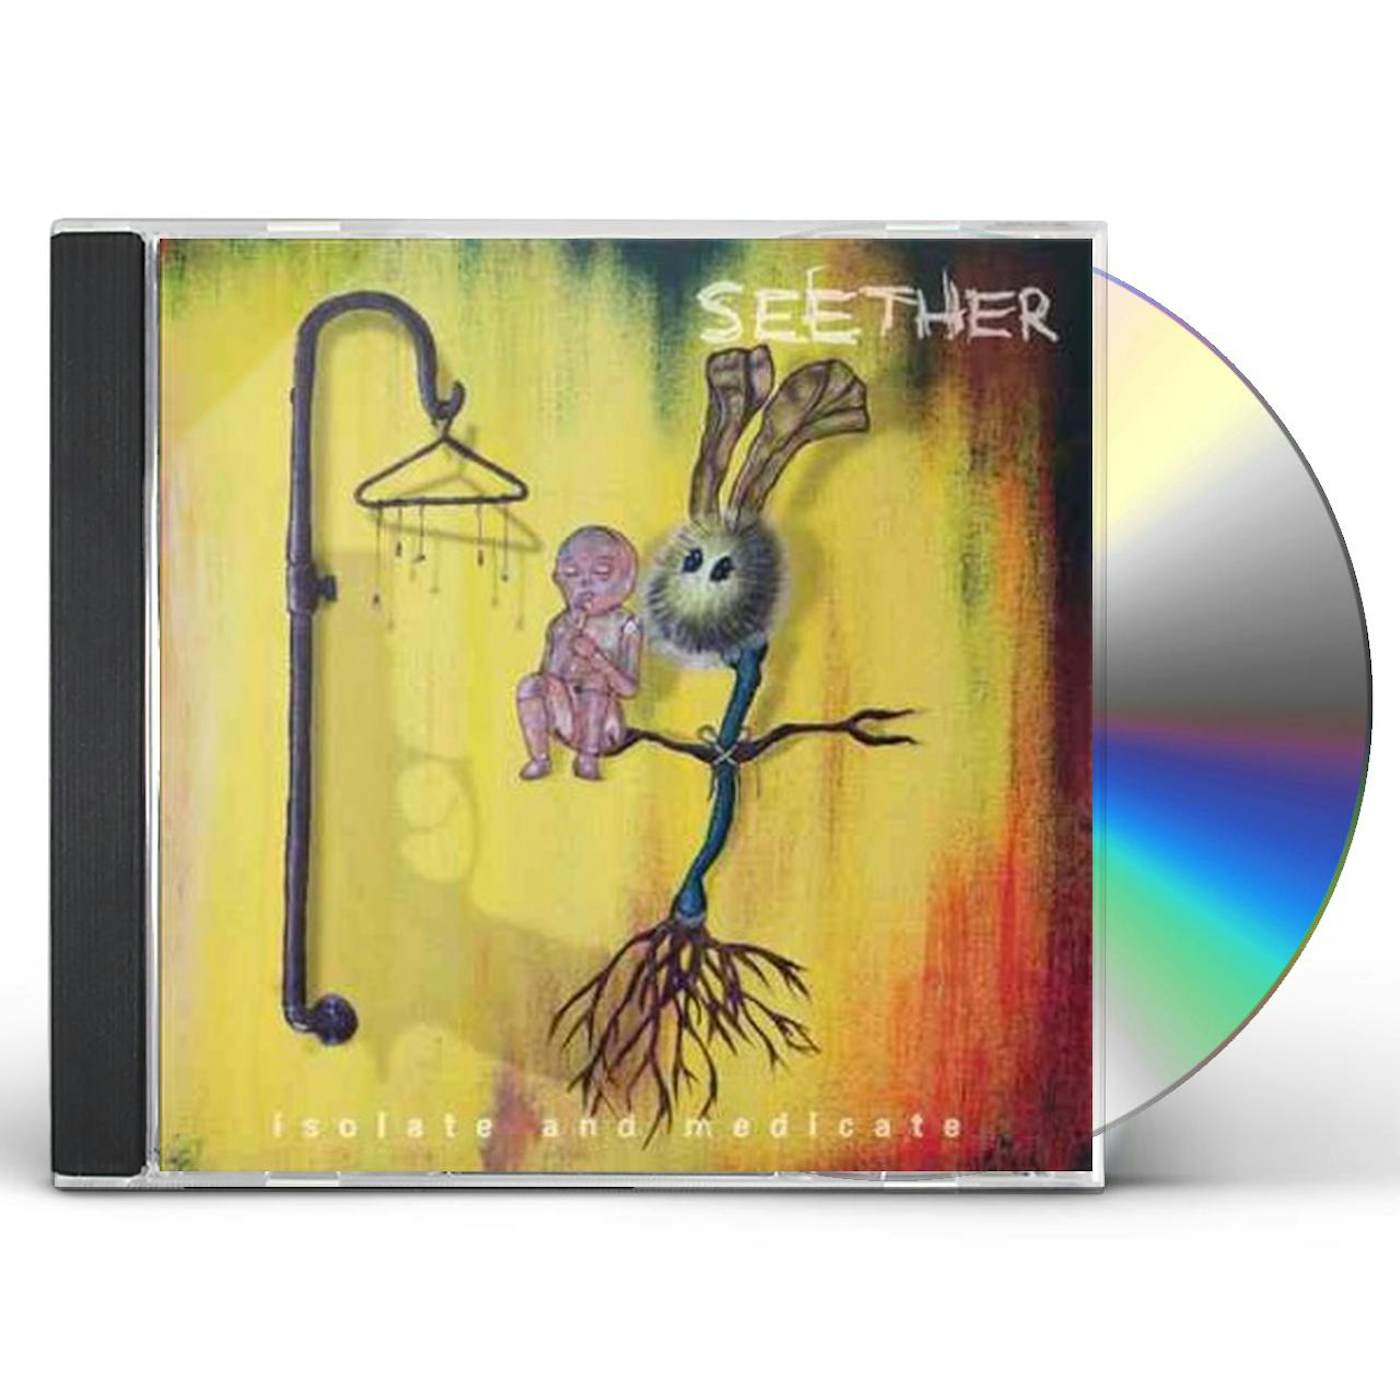 Seether ISOLATE & MEDICATE CD